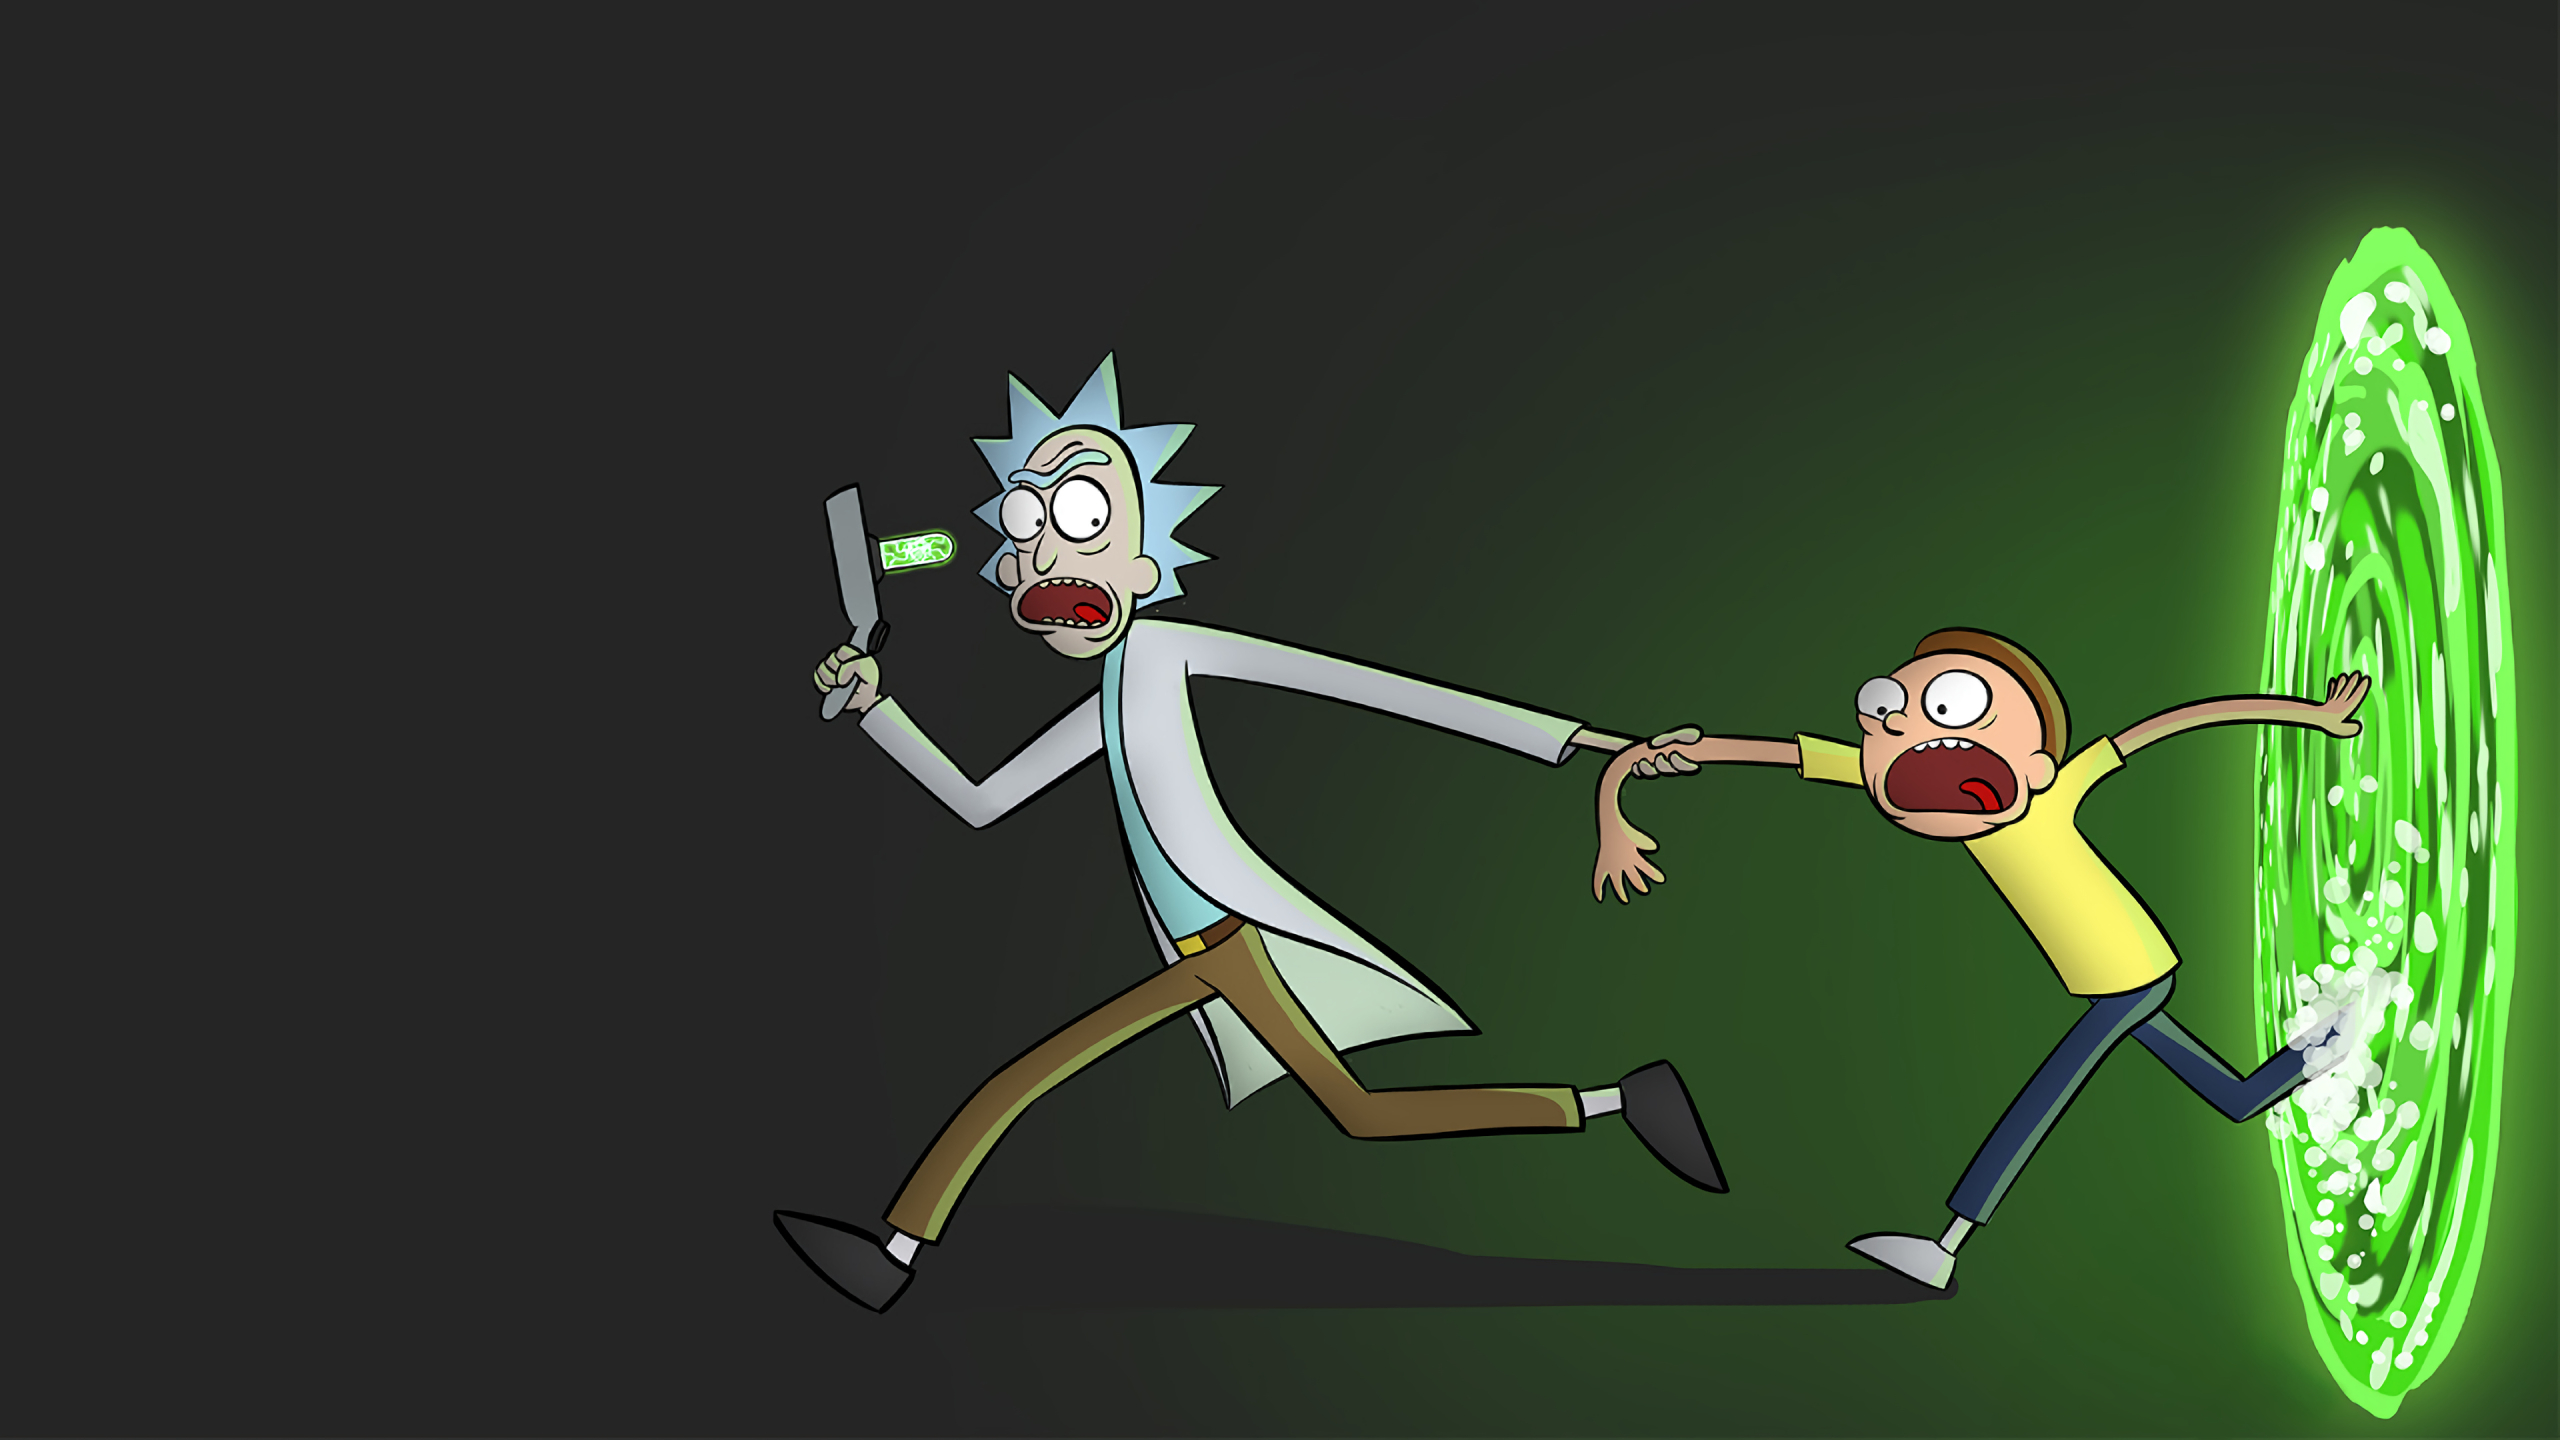 2560x1440 Rick And Morty Portal 1440p Resolution Wallpaper Hd Tv Series 4k Wallpapers Images Photos And Background